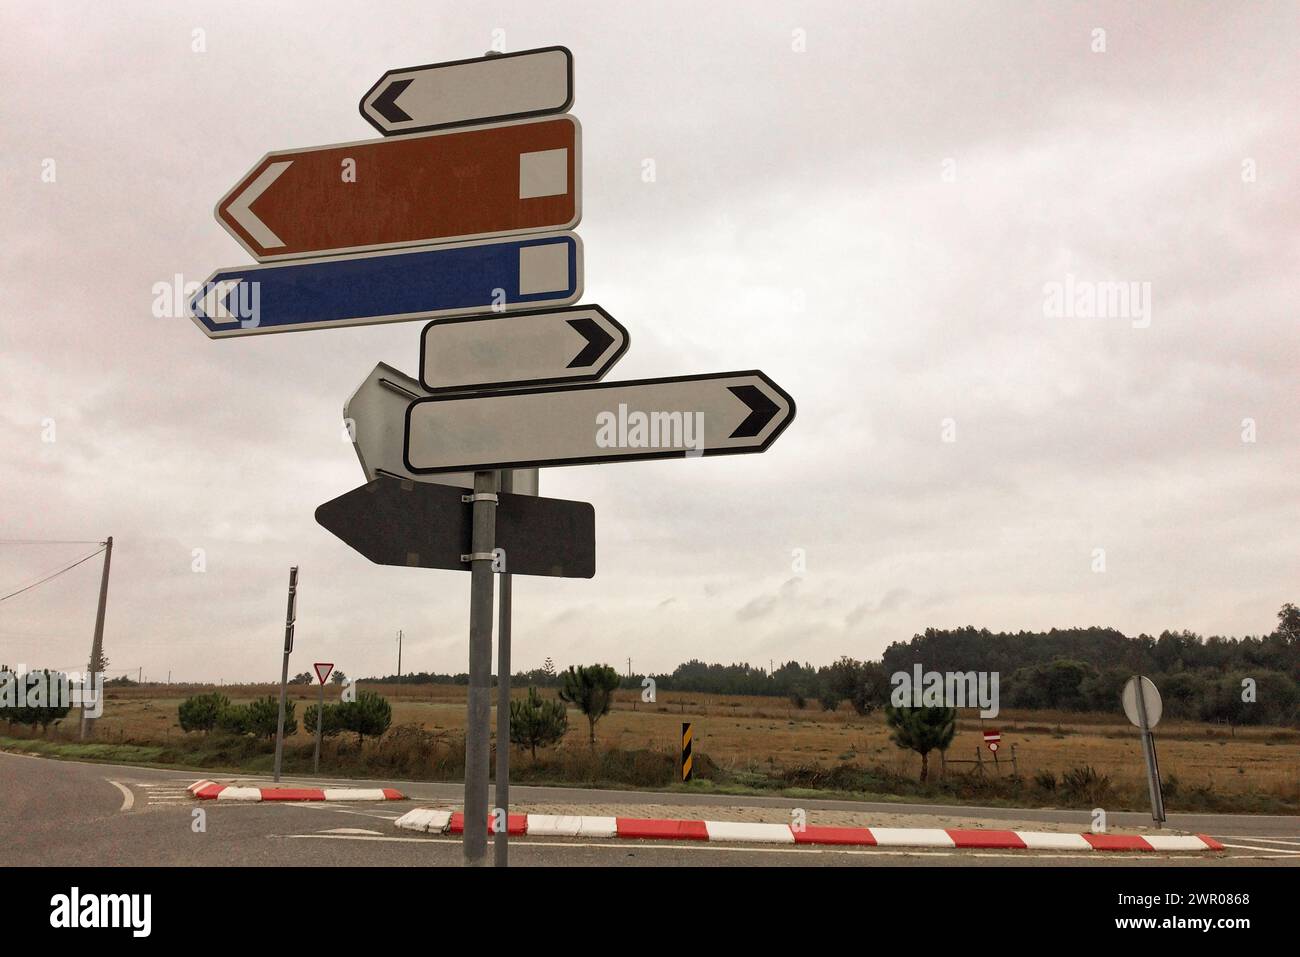 Five empty sign arrows, of different colors, point in various directions at a crossroad. Stock Photo